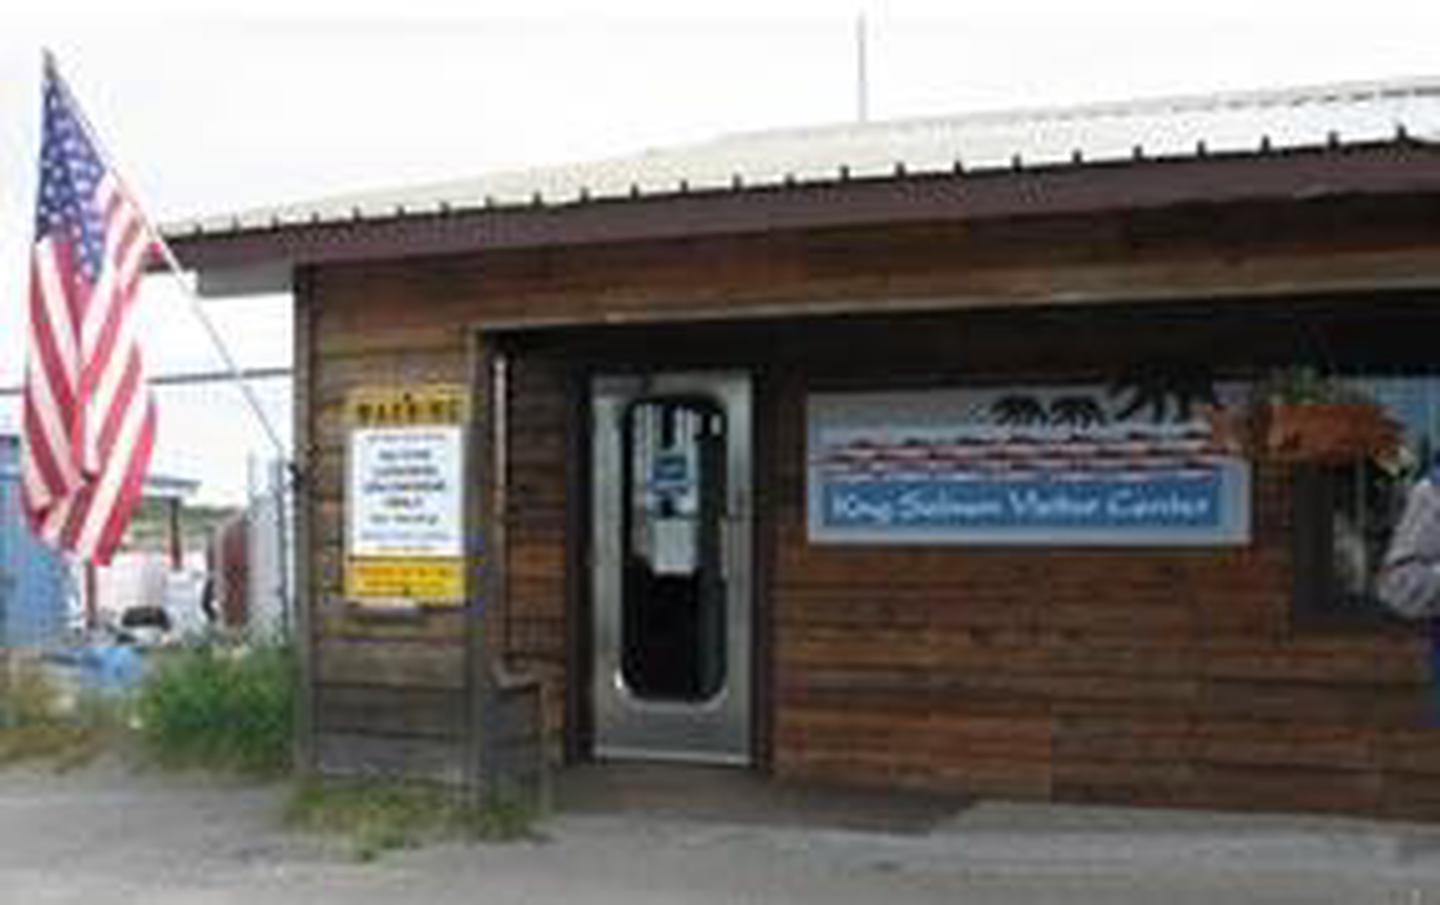 King Salmon Visitor CenterThe King Salmon Visitor Center is often the first stop on the journey to explore Katmai National Park & Preserve and other public lands.